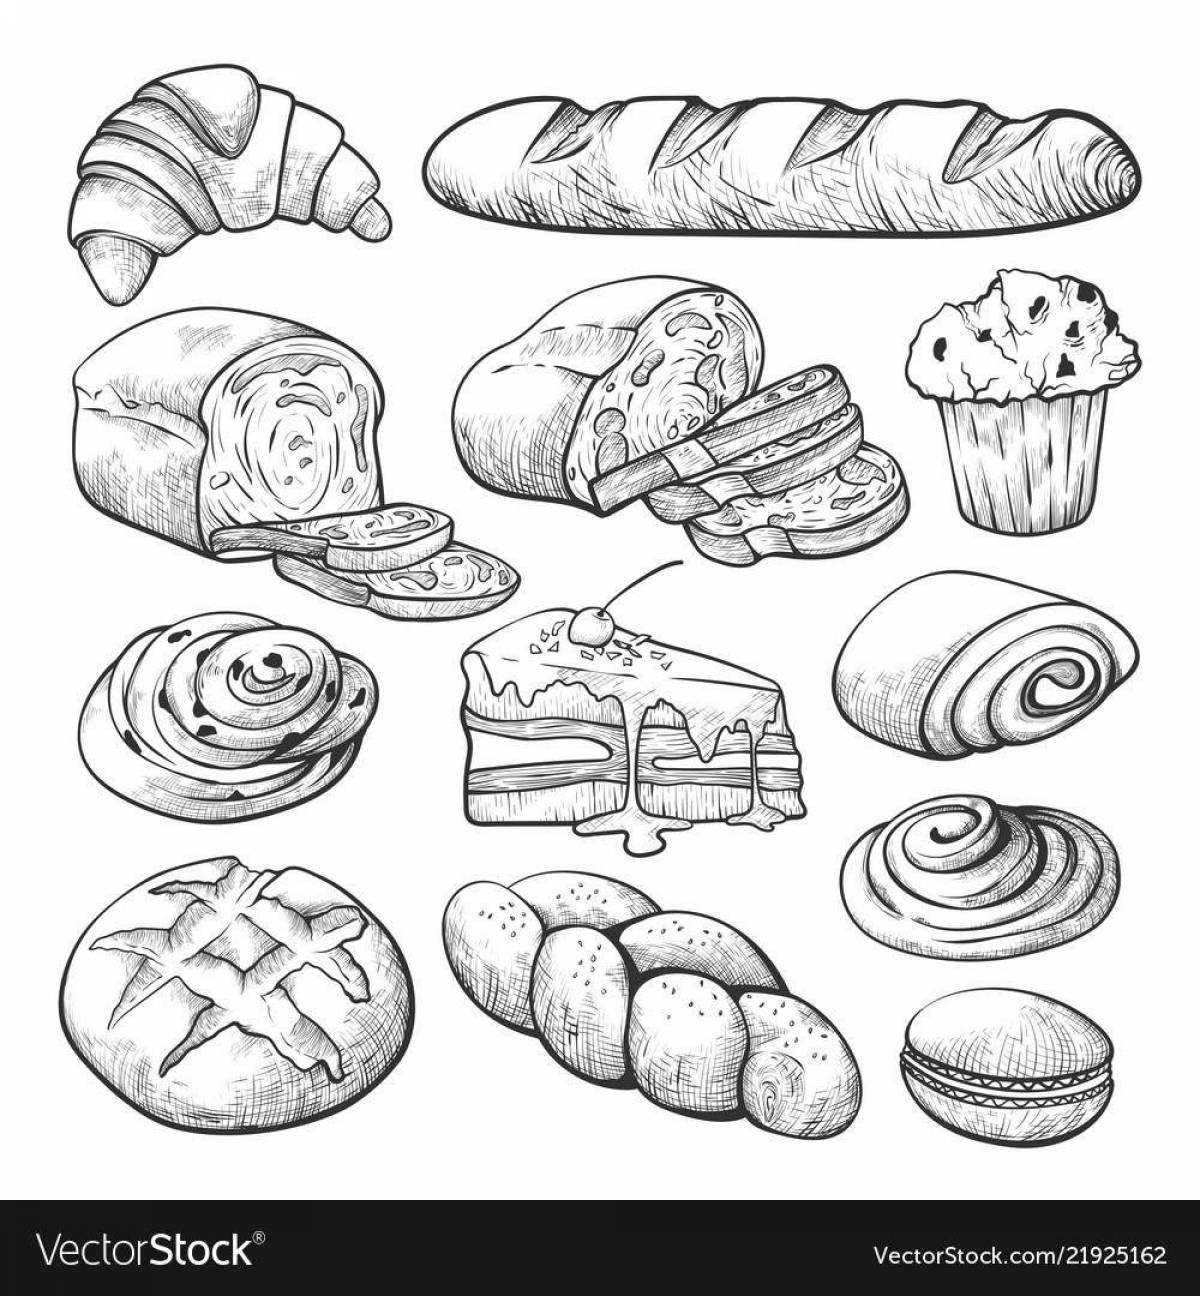 Spicy baked goods coloring book for preschoolers